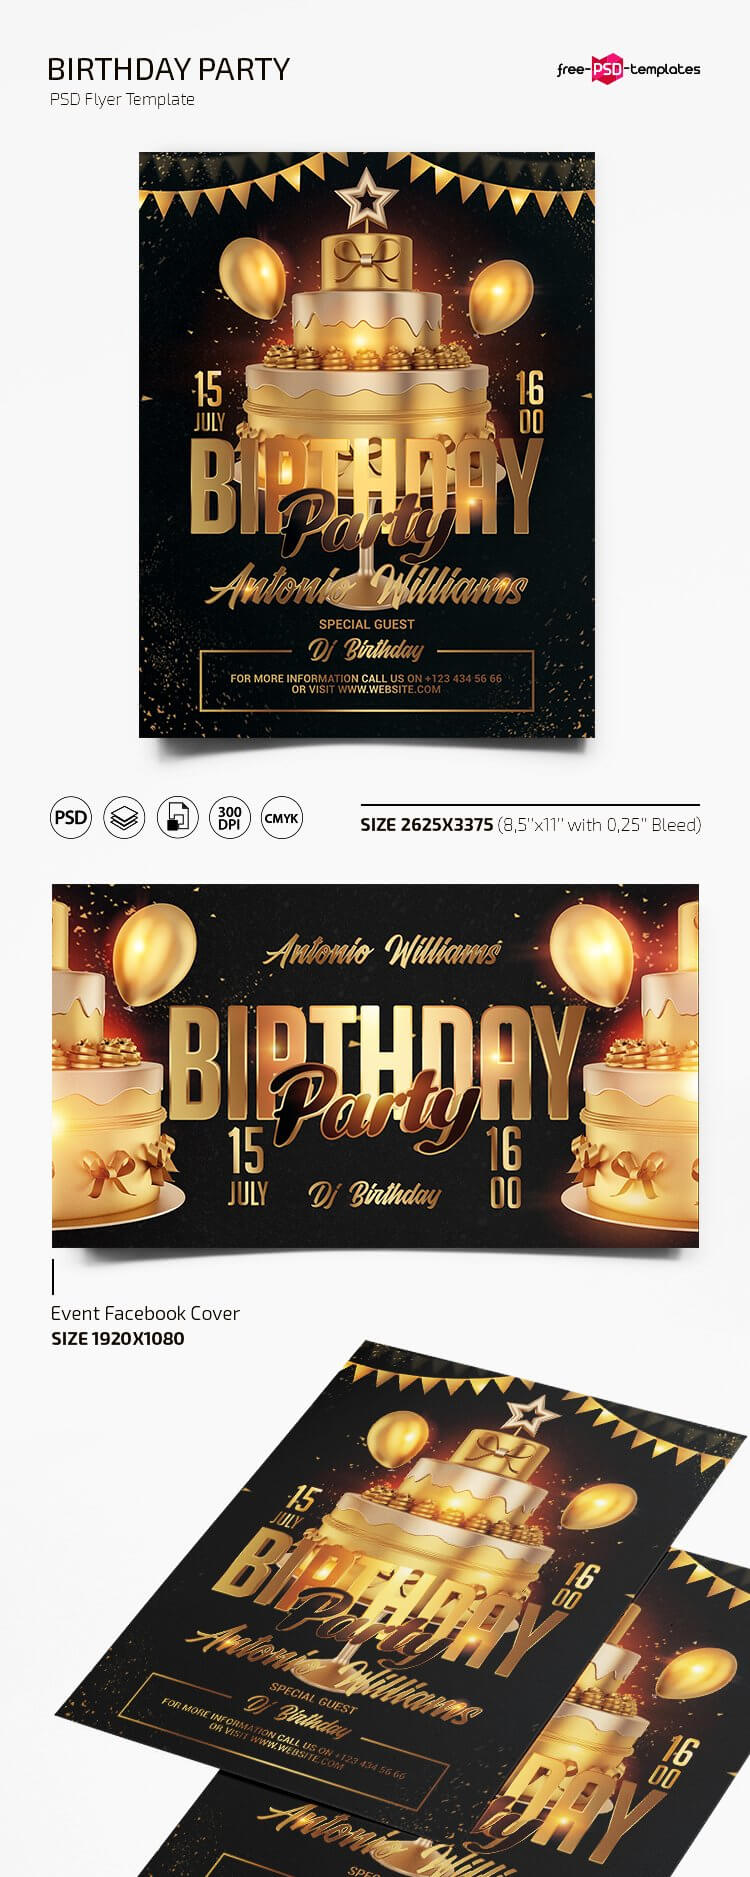 Free Birthday Party Flyer Template In Psd | Free Psd Templates Within Birthday Party Flyer Templates Free